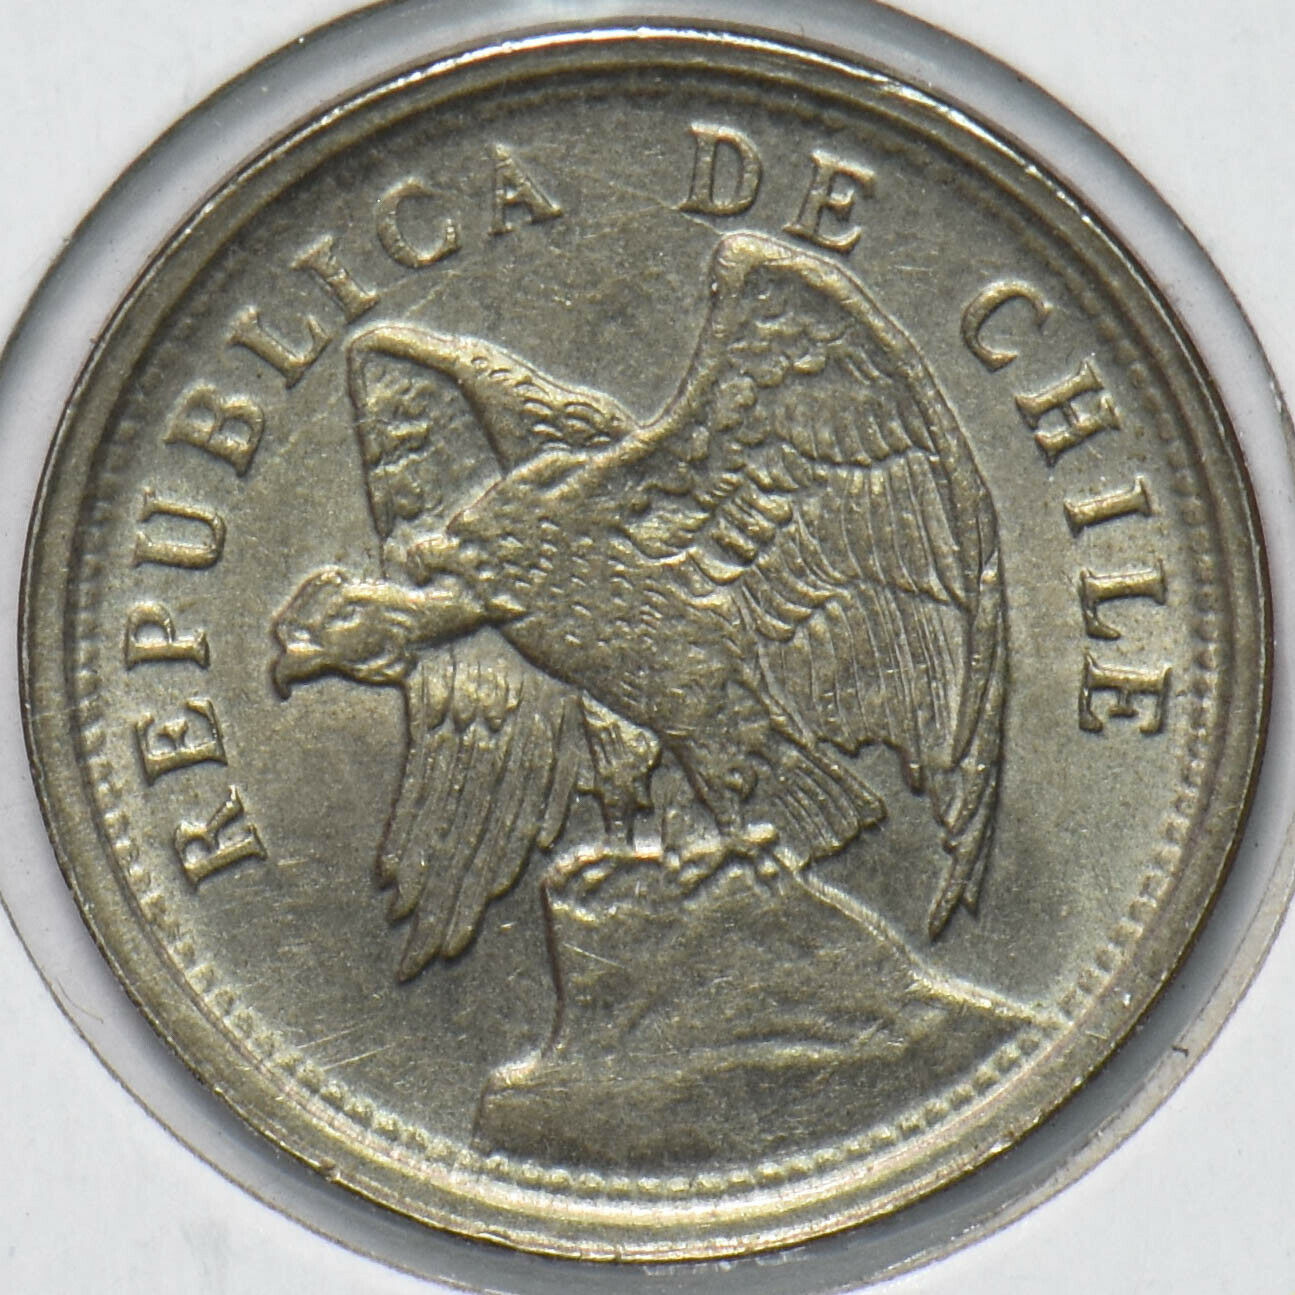 Chile 1925 20 Centavos Vulture animal 293303 combine shipping